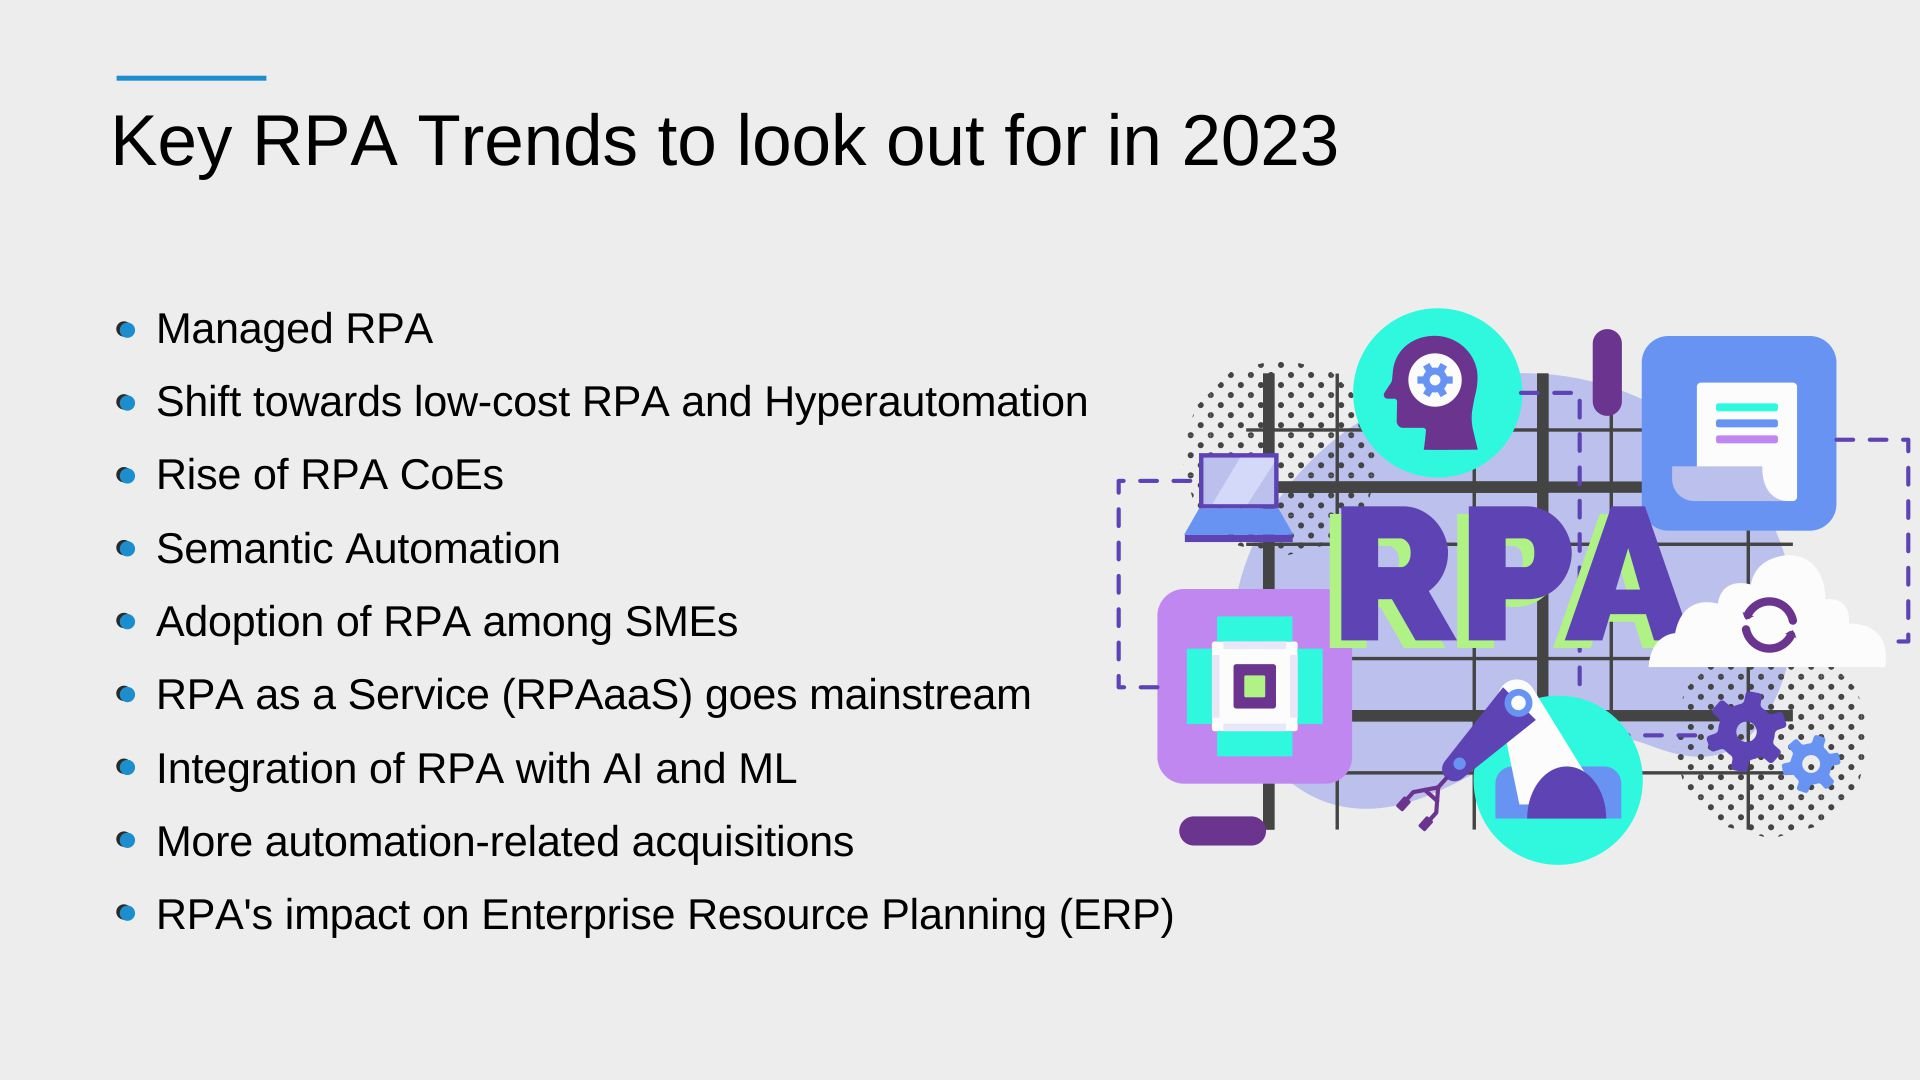 Key RPA Trends to look out for in 2023 - Inside Image